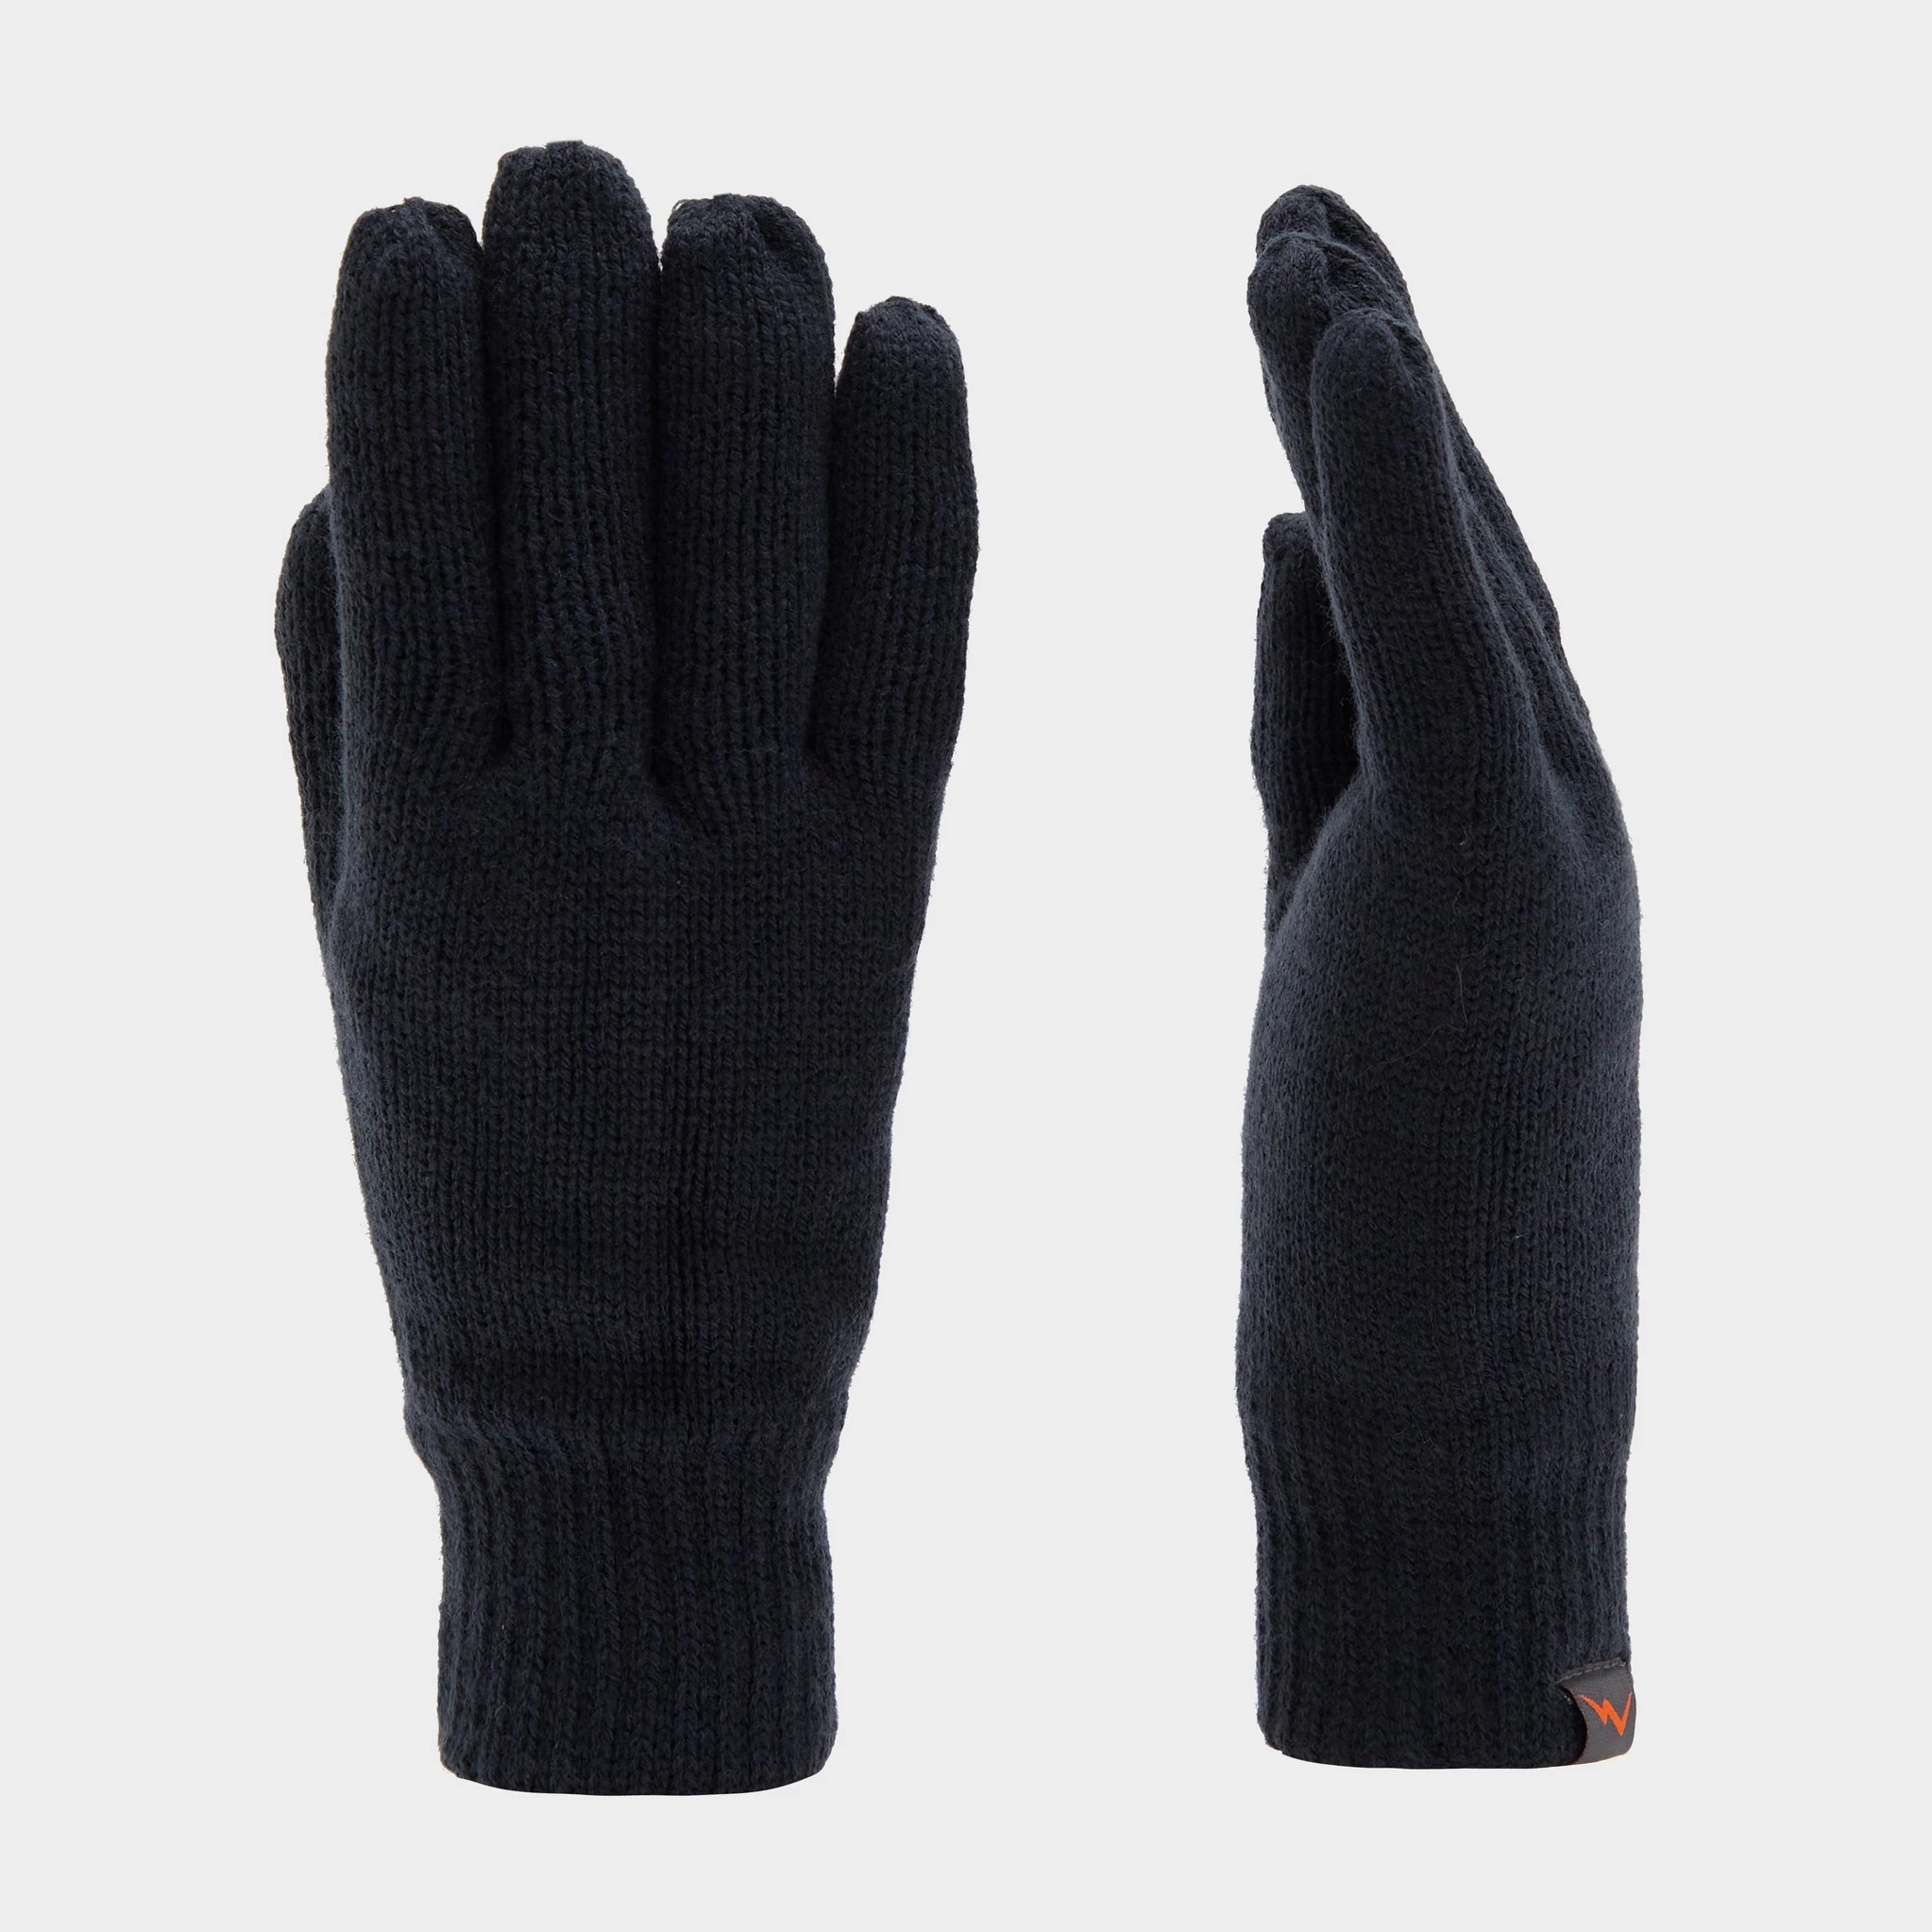 Peter Storm Women’s Winter Thermal Gloves